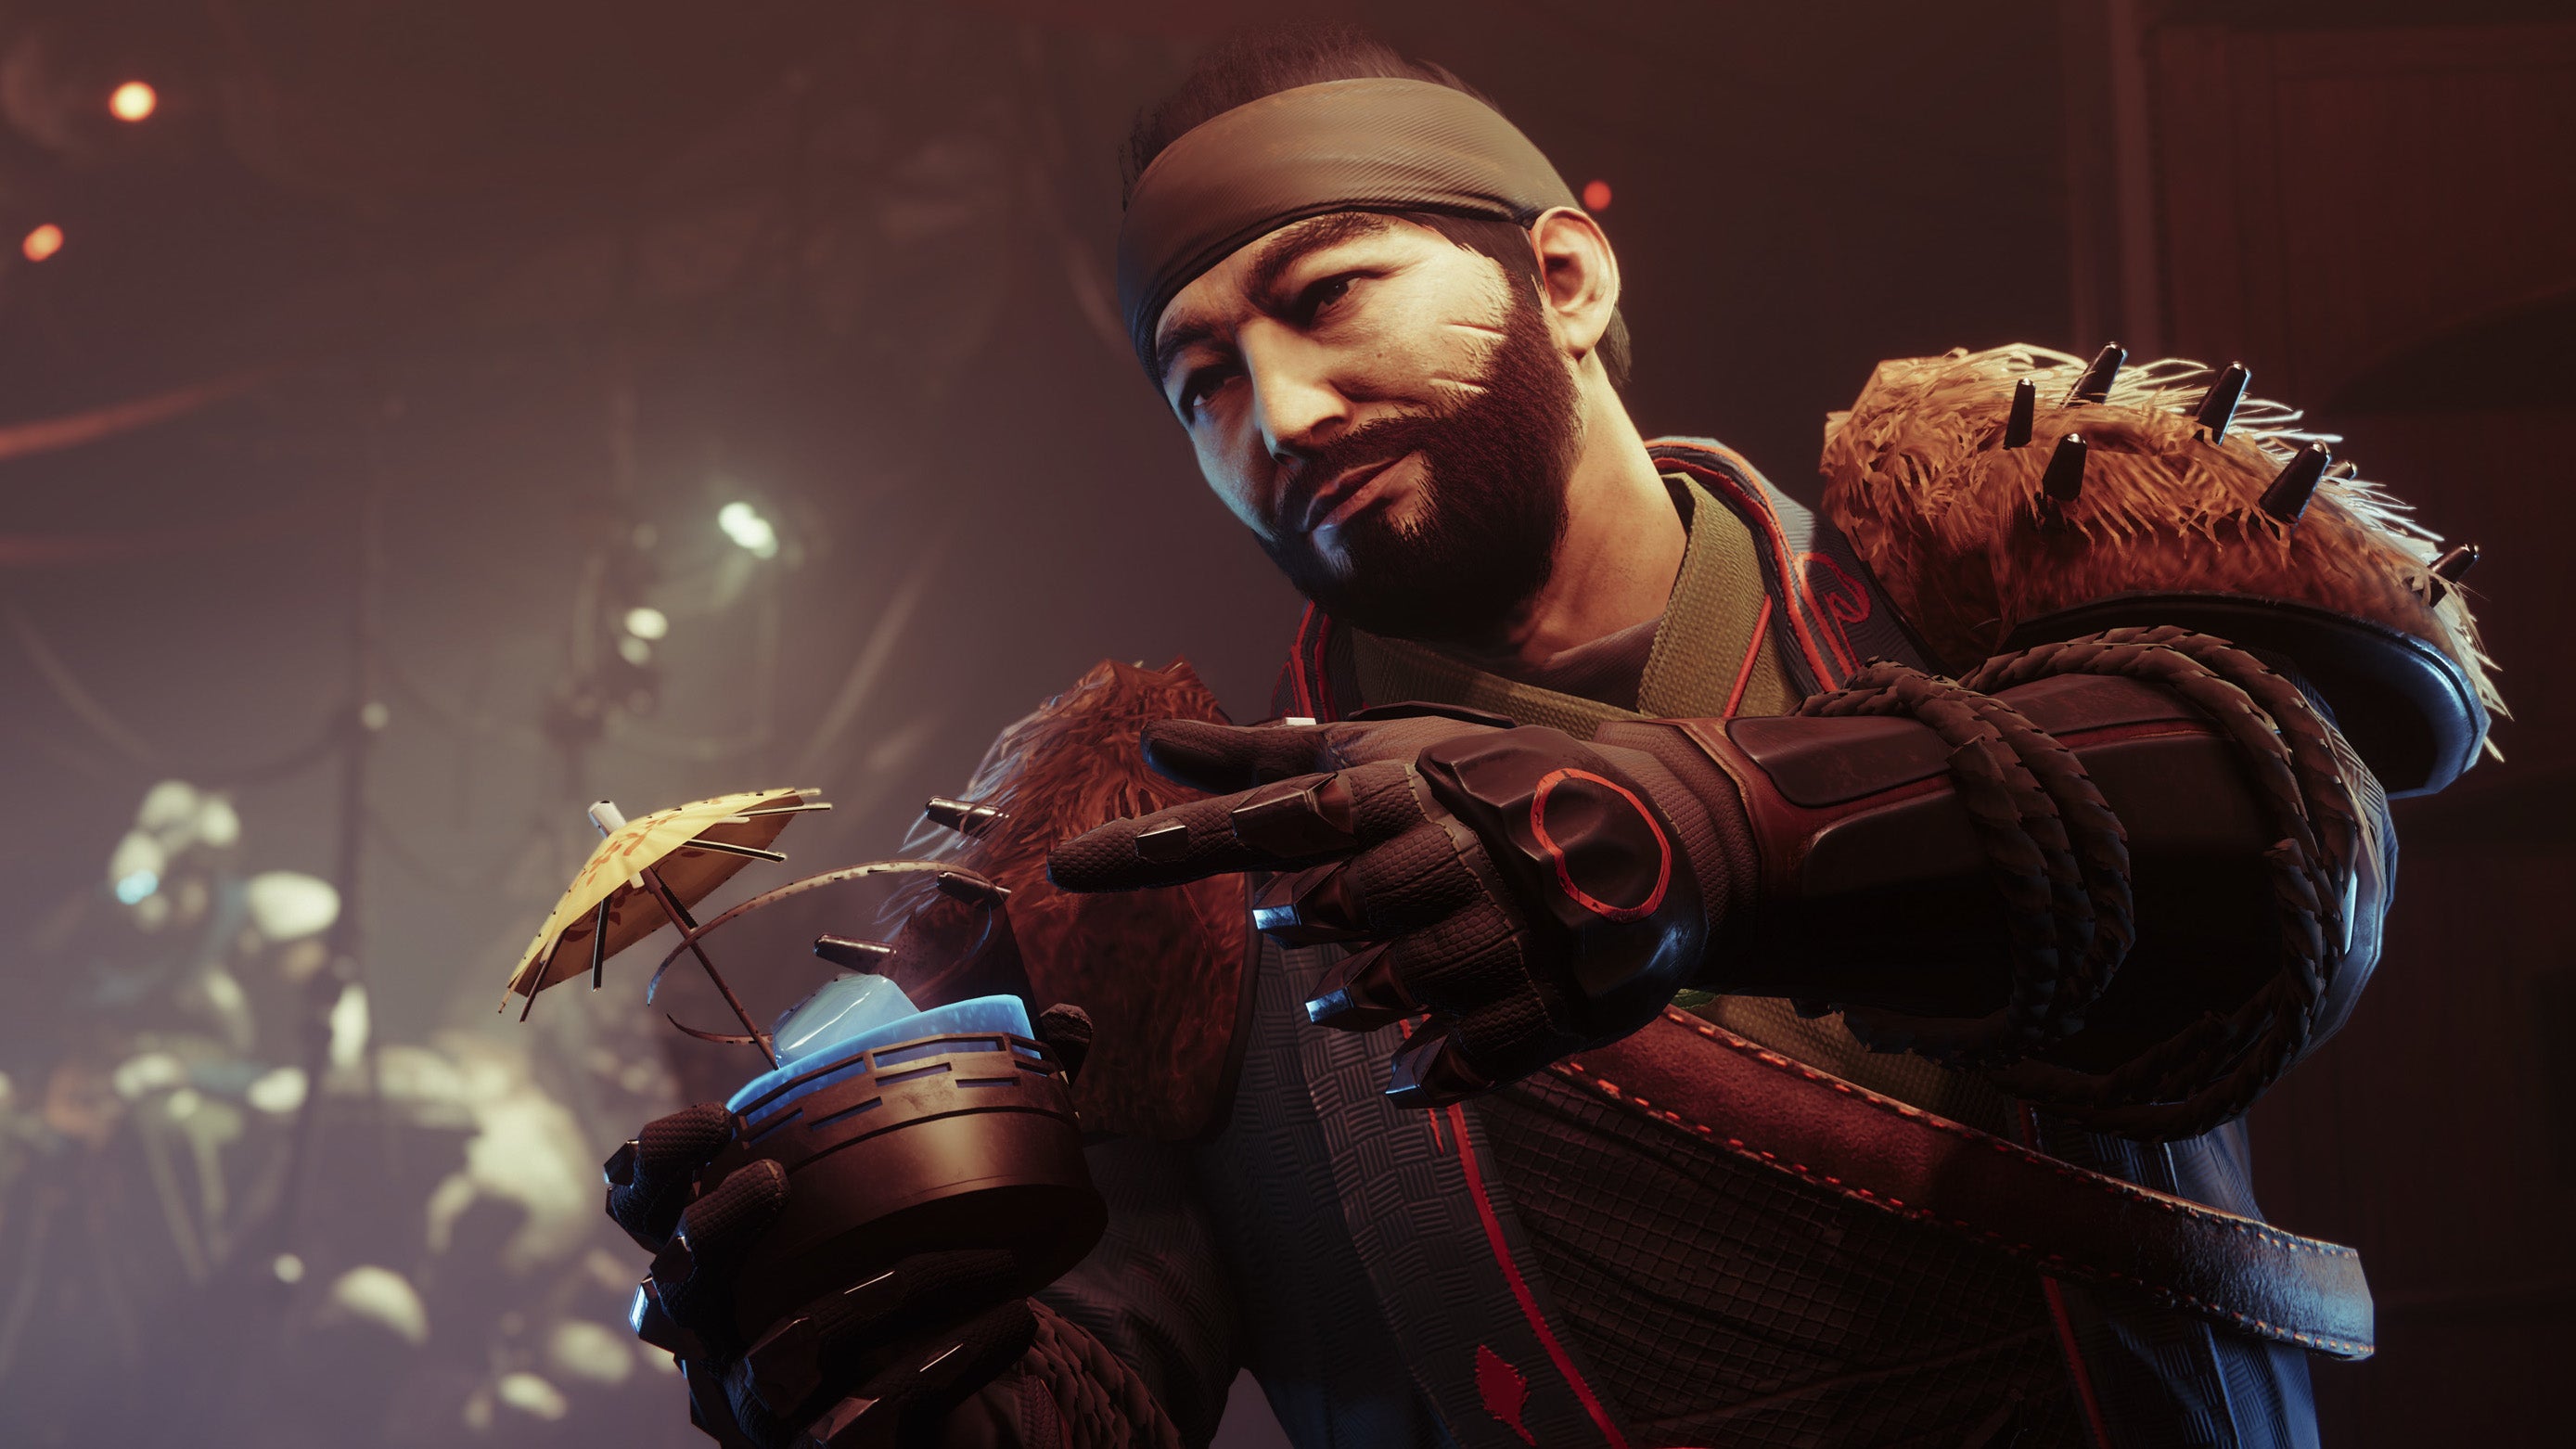 Drifter raises a tropical cocktail (complete with umbrella) in a Destiny 2: Season of Plunder screenshot.